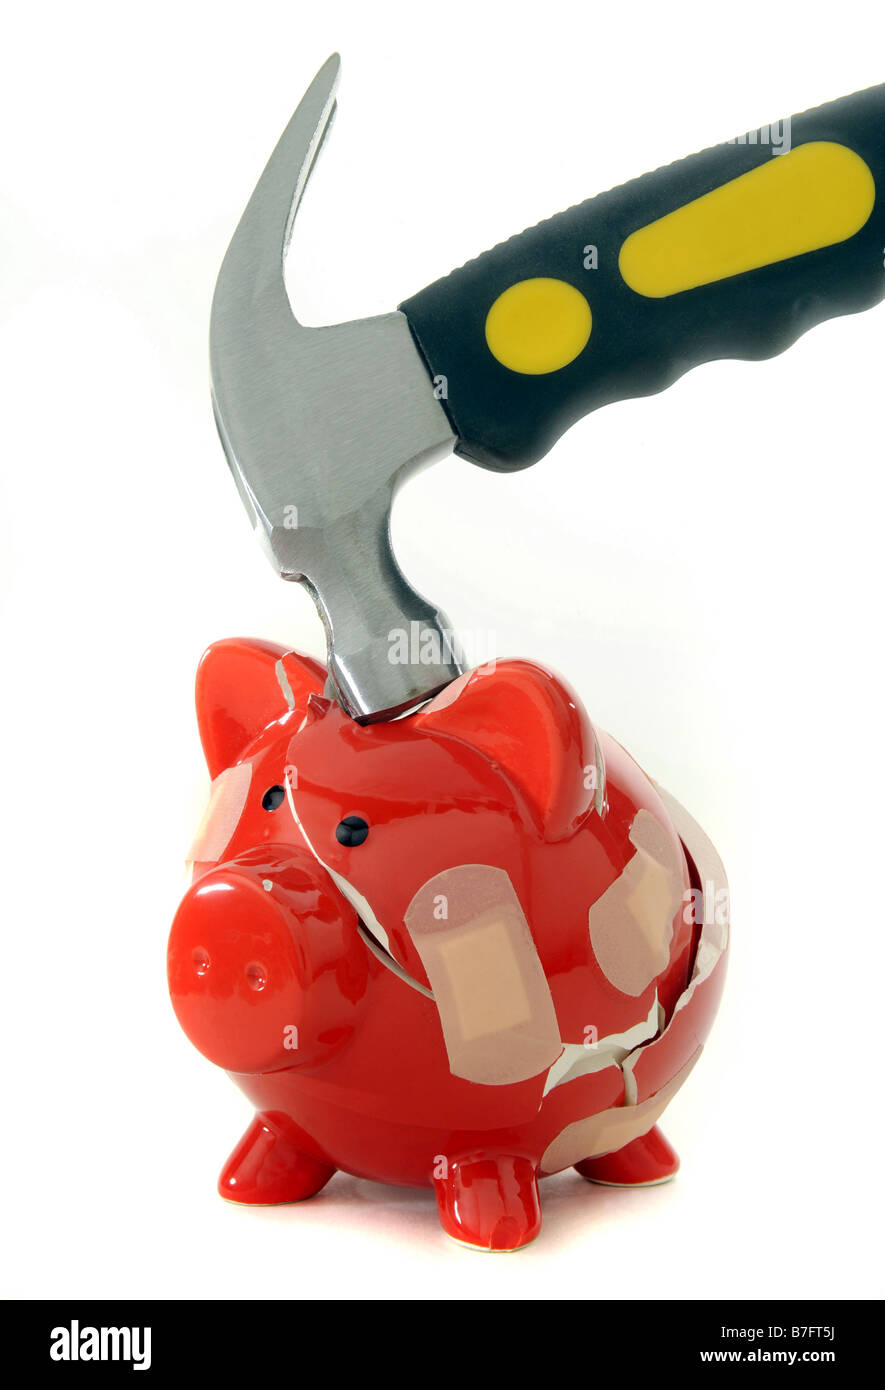 RED  PIGGYBANK BROKEN BY A HAMMER HELD TOGETHER WITH PLASTERS. Stock Photo